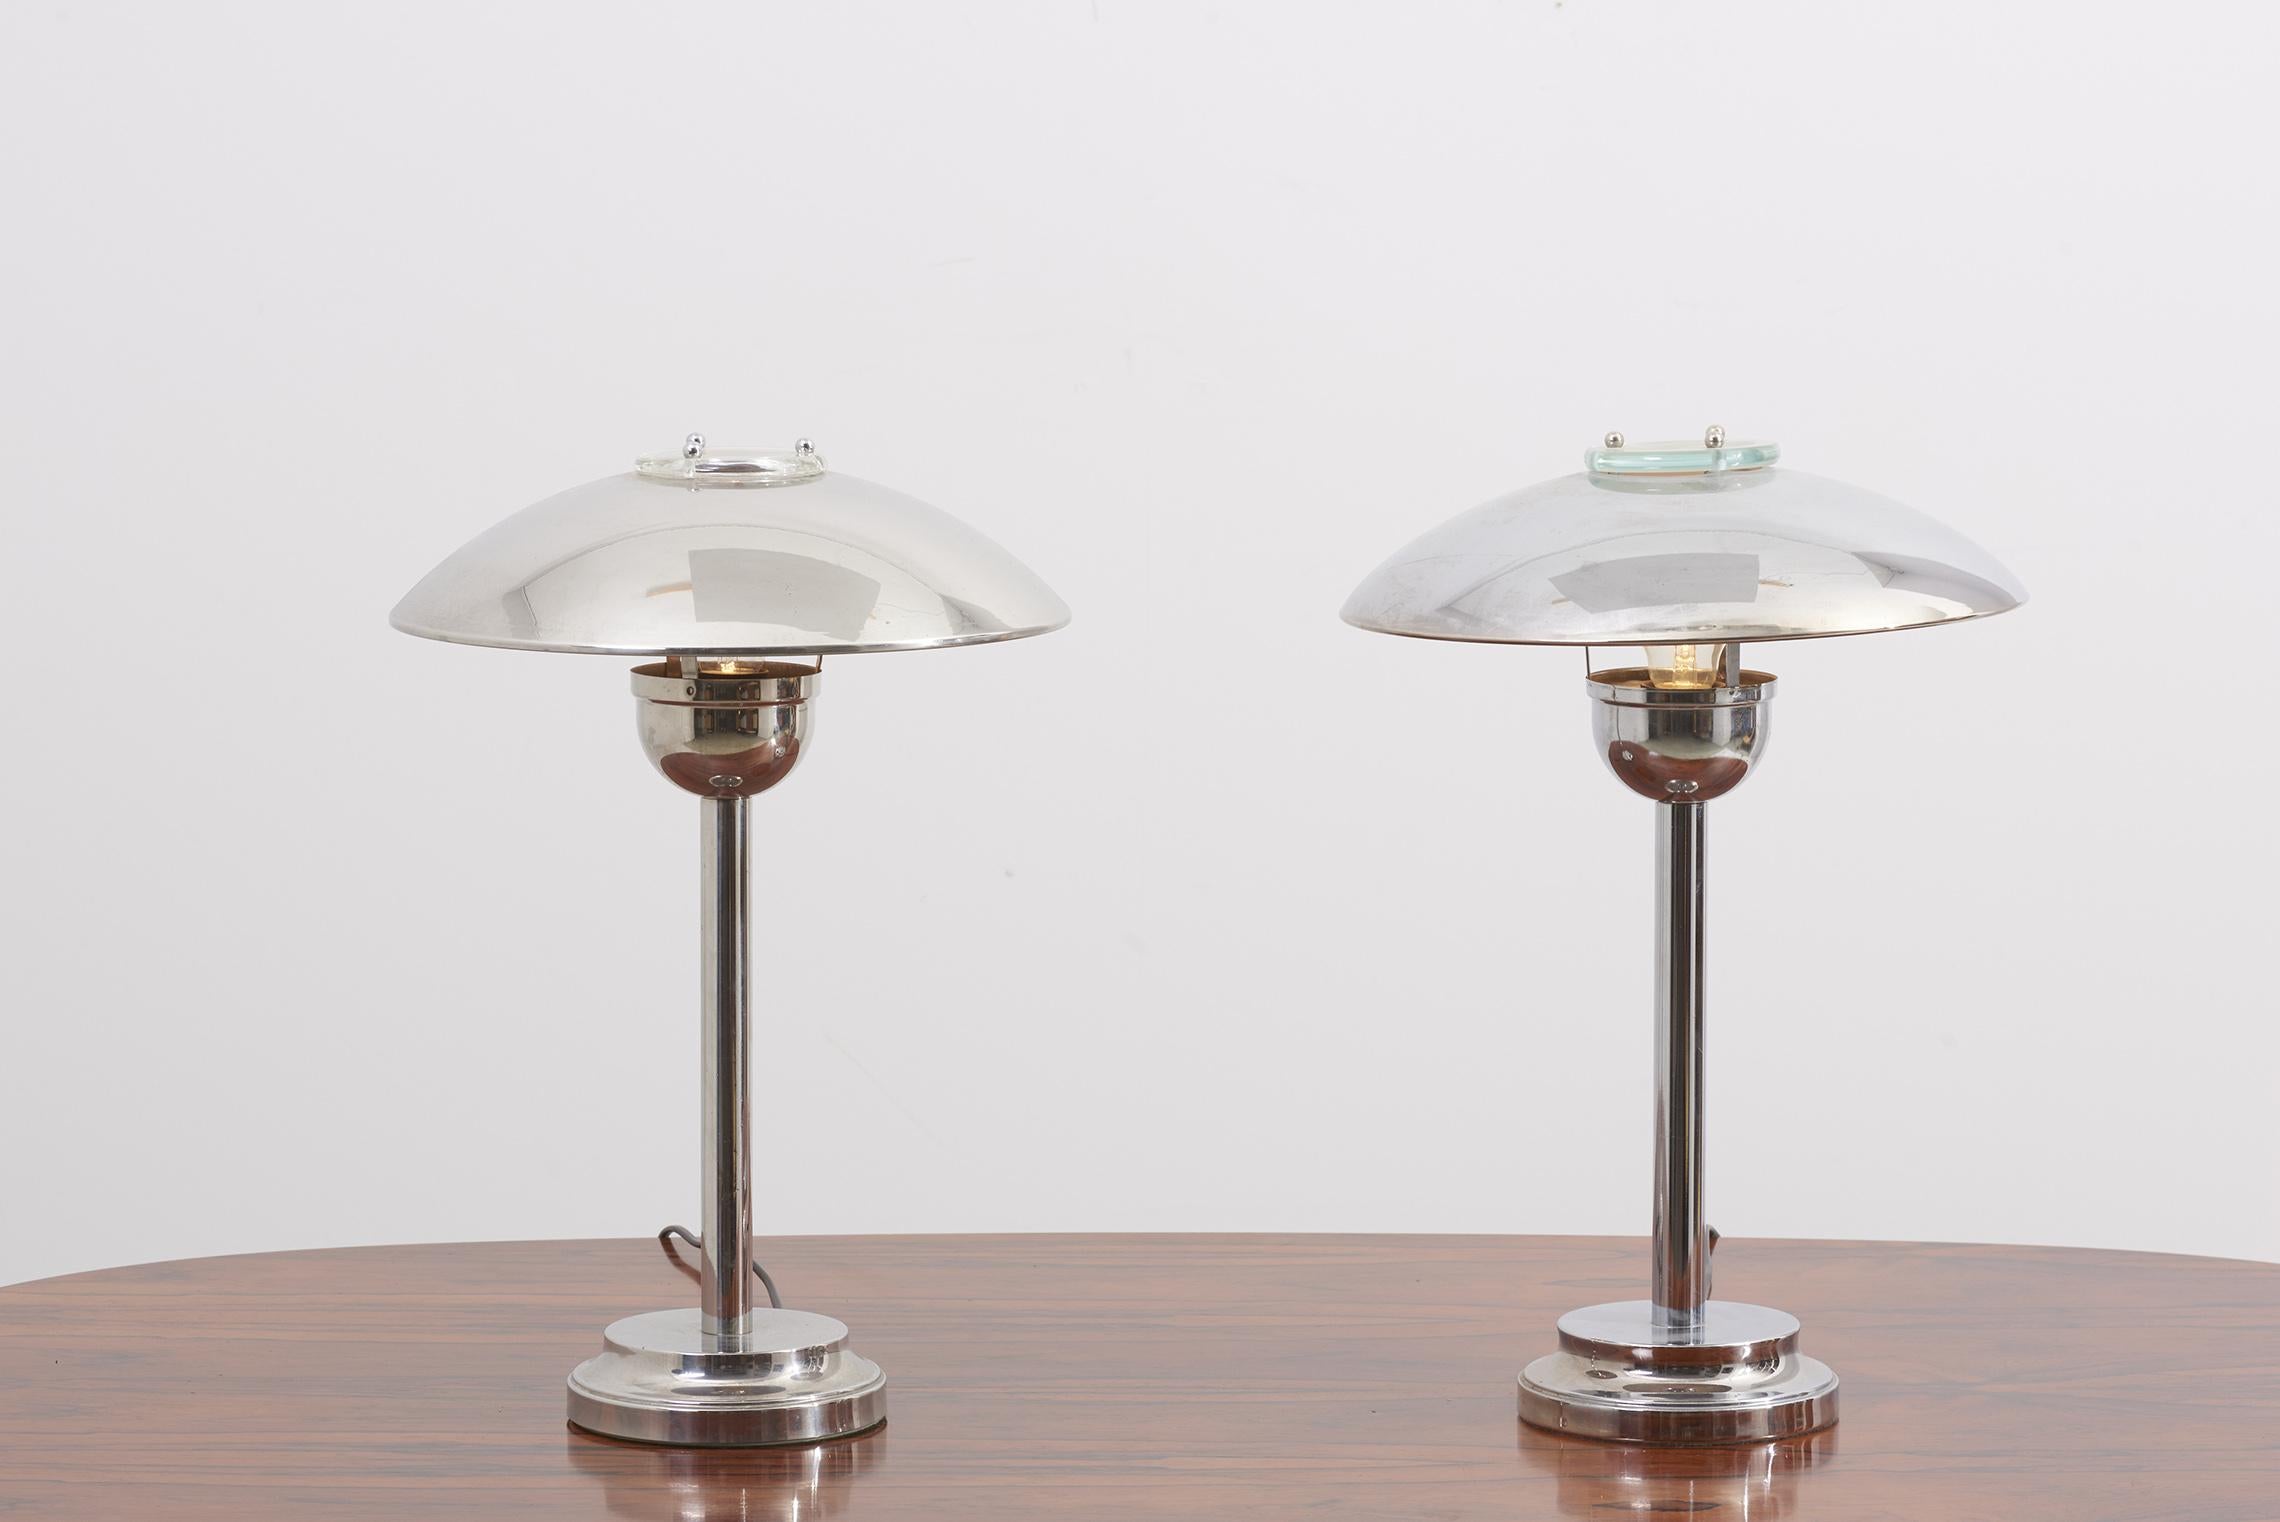 Set of 2 table lamps in polished steel / chrome.